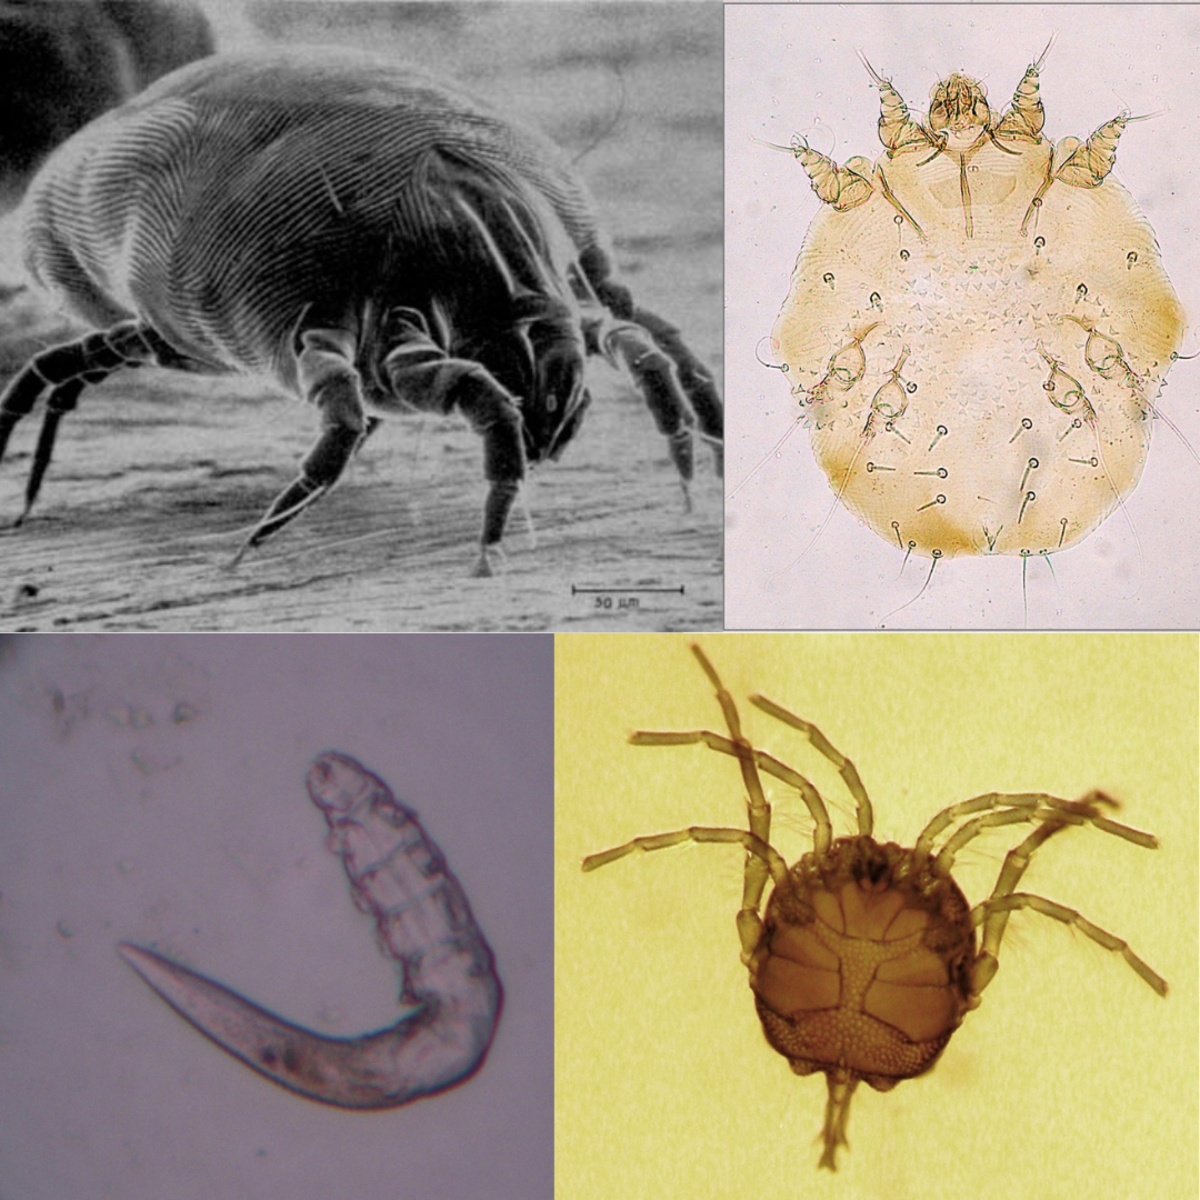 Clockwise from top left corner: dust mite, parasitic mite, water mite, face mite.